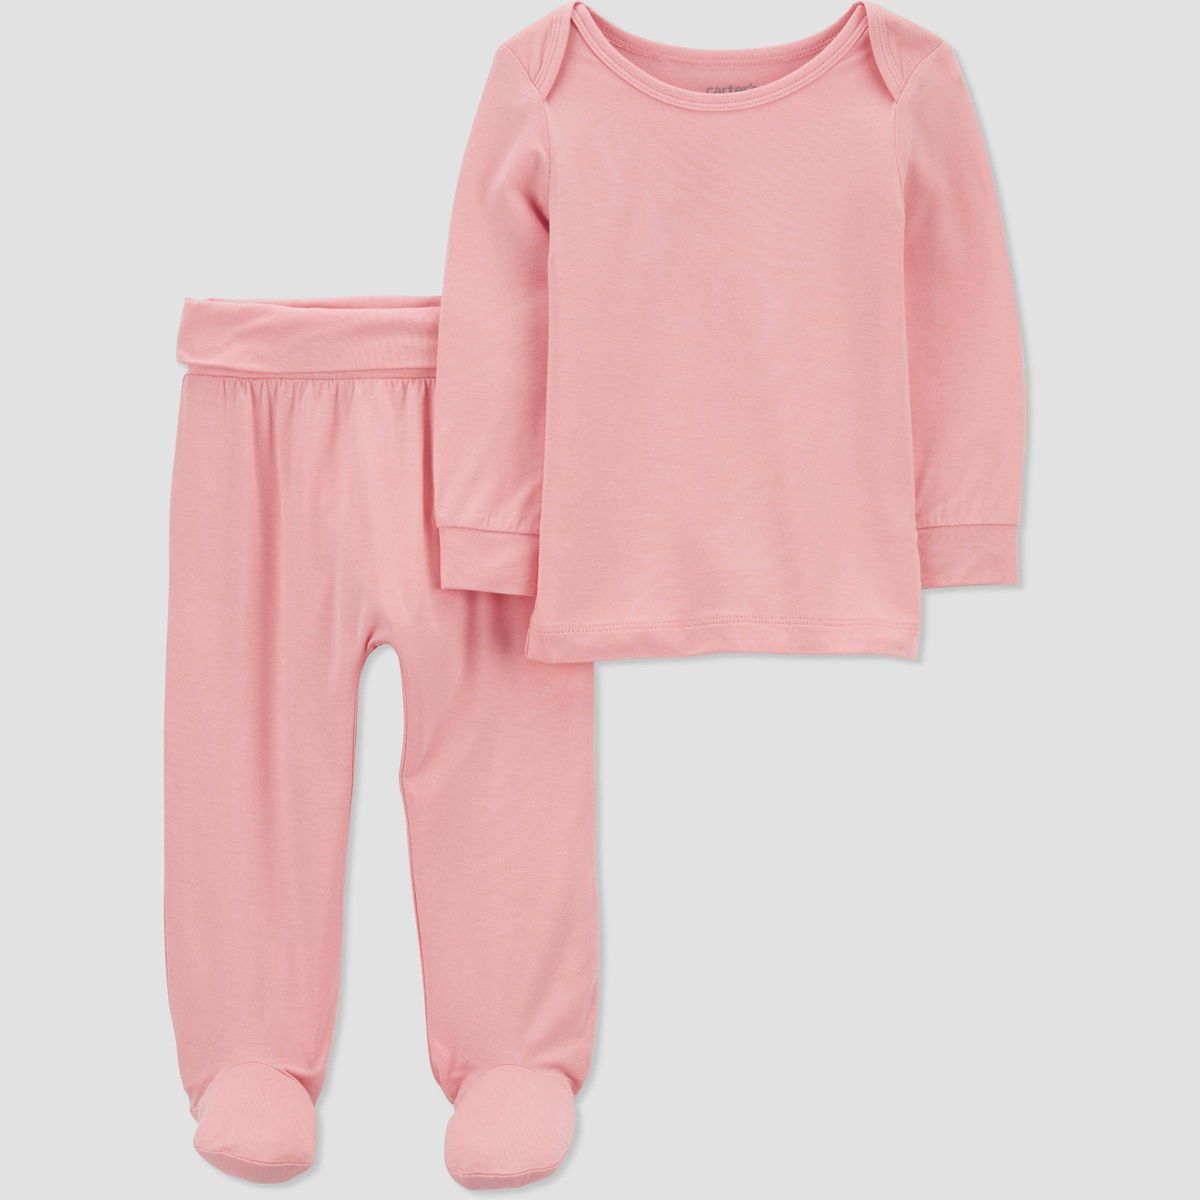 Carter's Just One You®️ Baby Girls' 2pc EcoVero Top & Bottom Set - Pink | Target